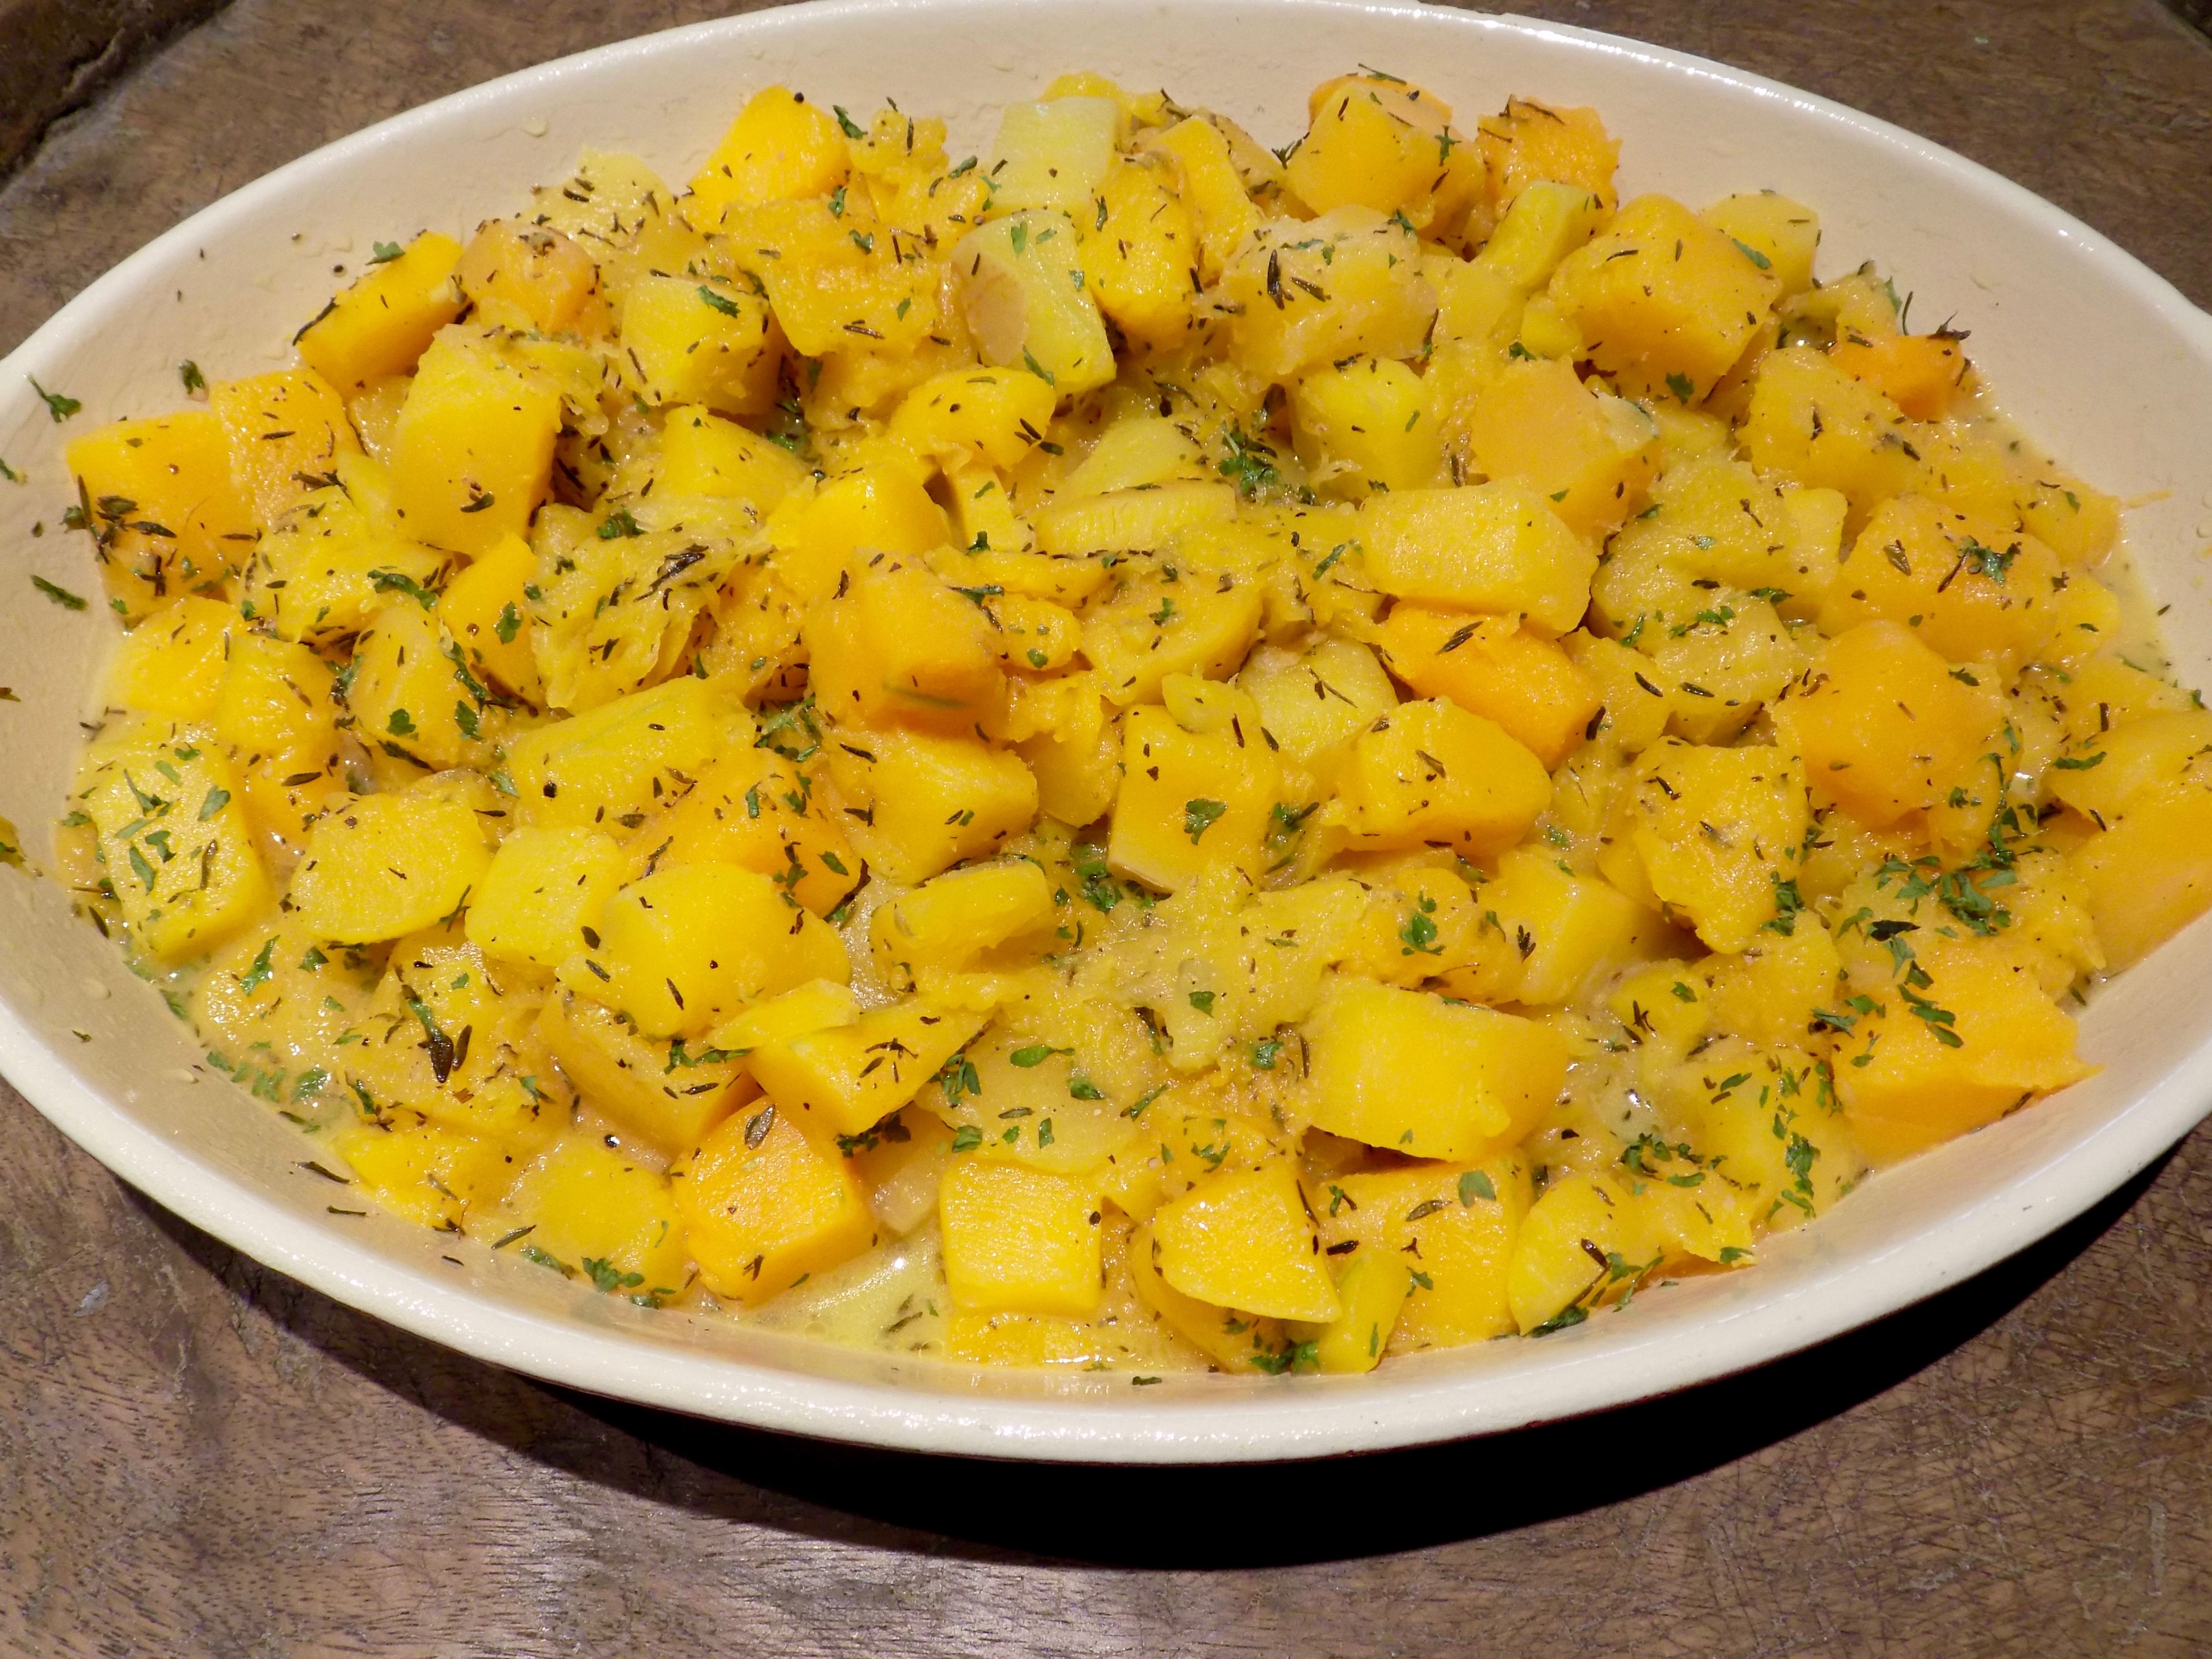 THE ROASTED SQUASH IS WAITING FOR ITS TOPPING MIXTURE.